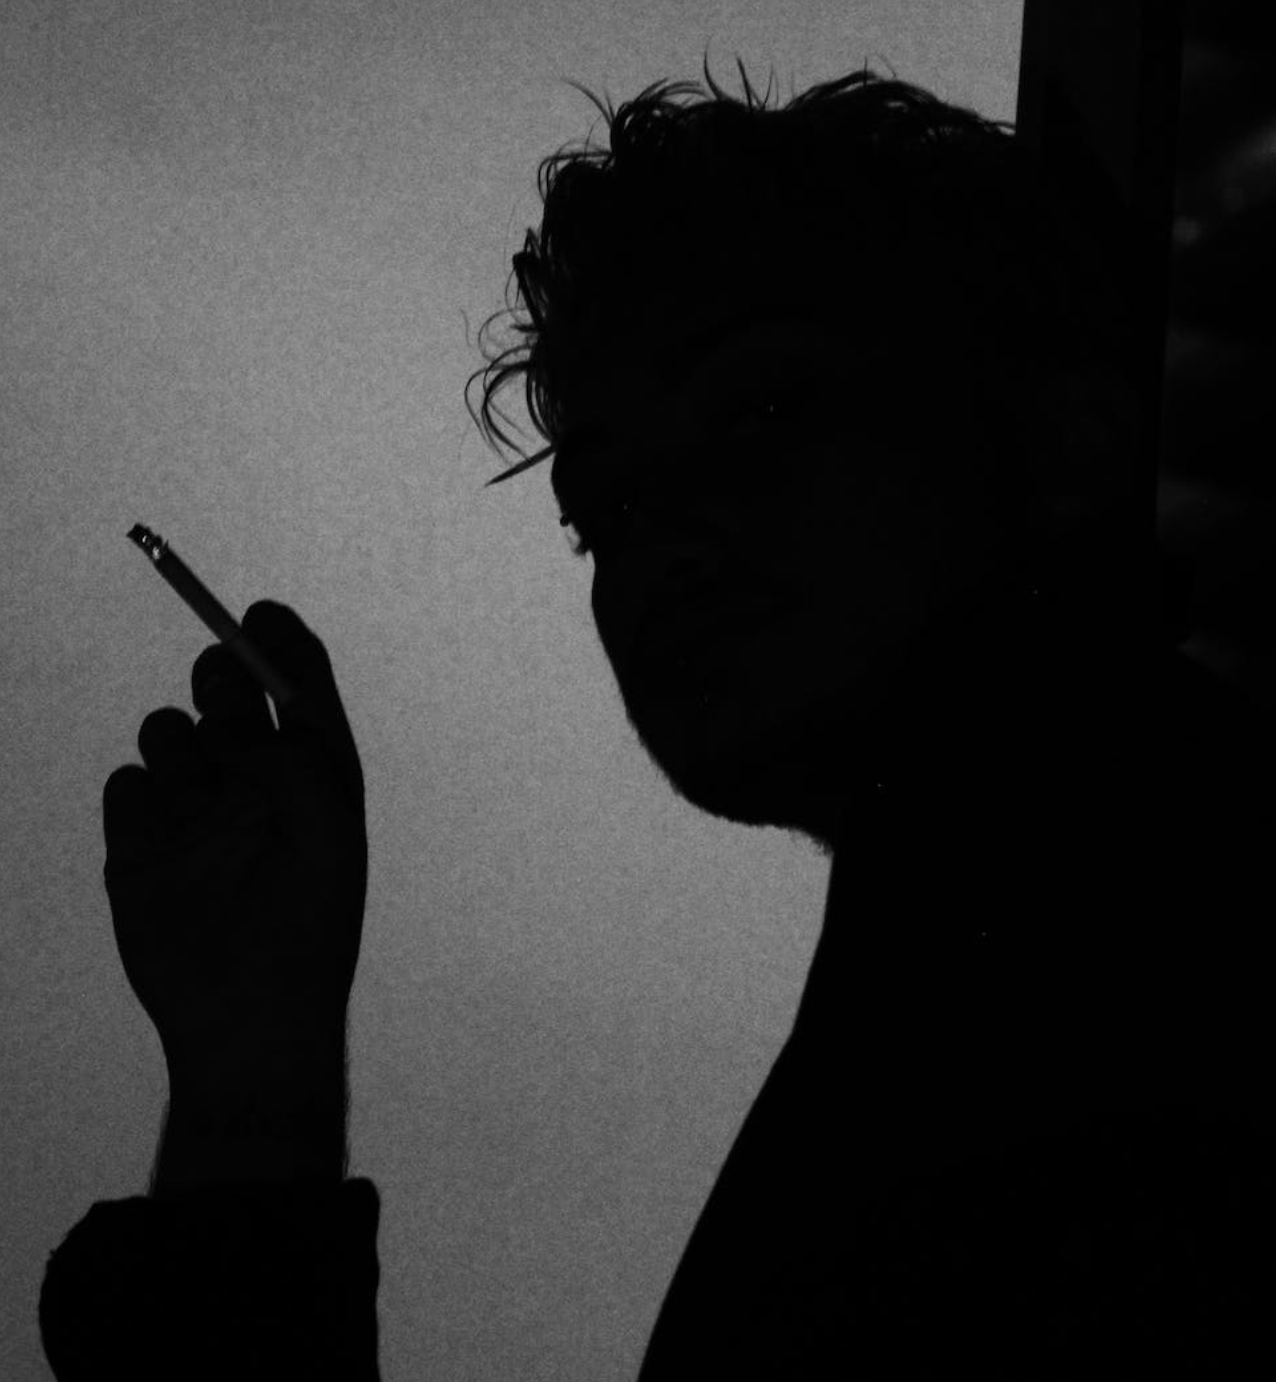 Silhouette of smoker with cigarette in darkness